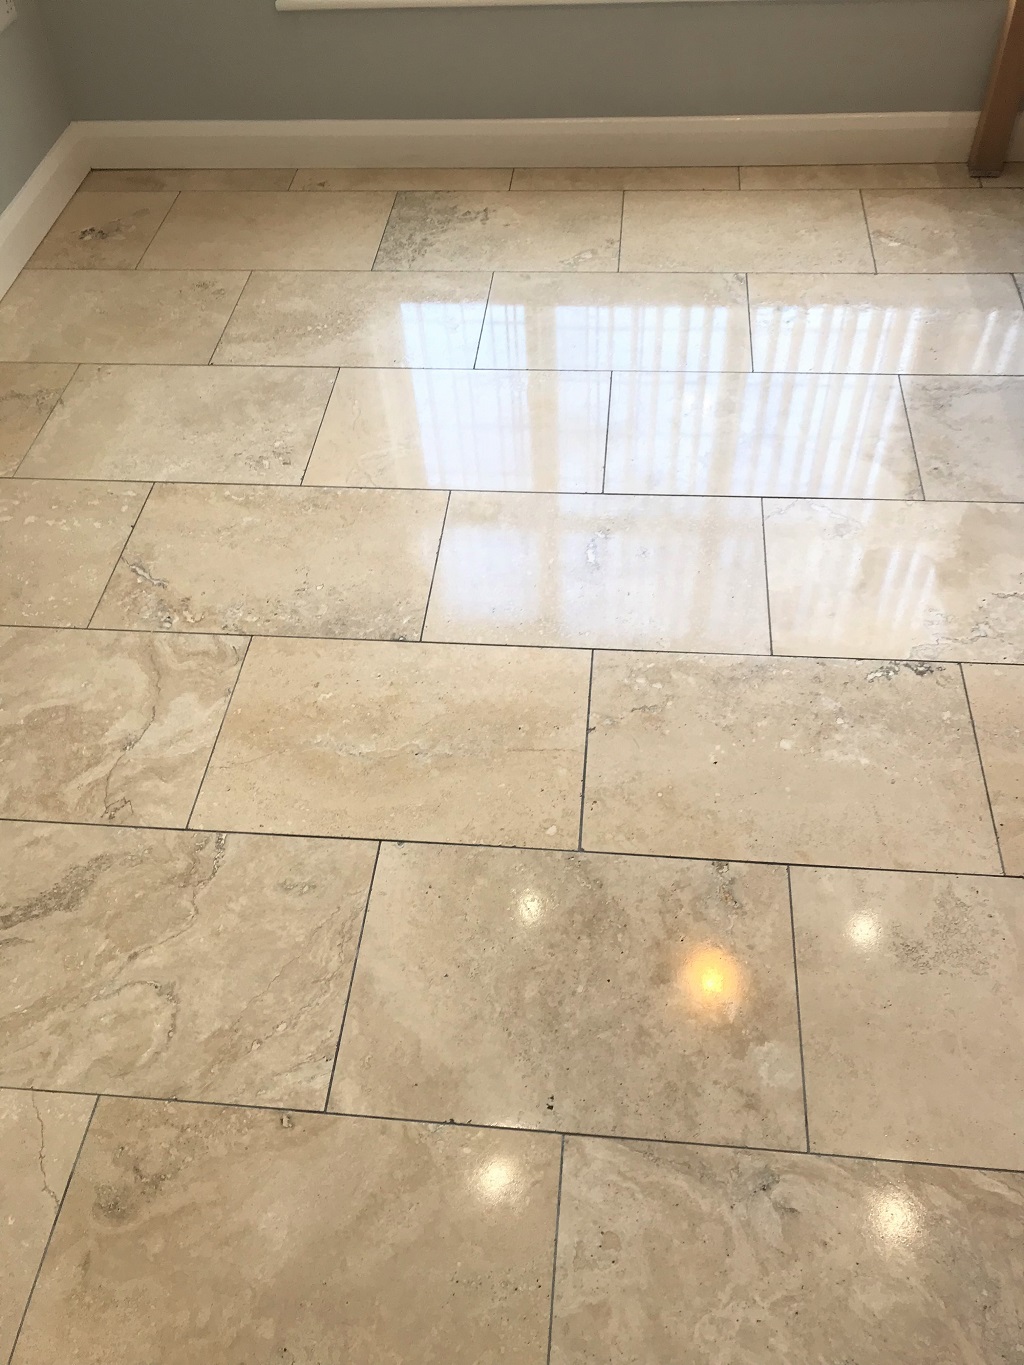 Travertine Kitchen Floor Tiles After Cleaning Stoke on Trent